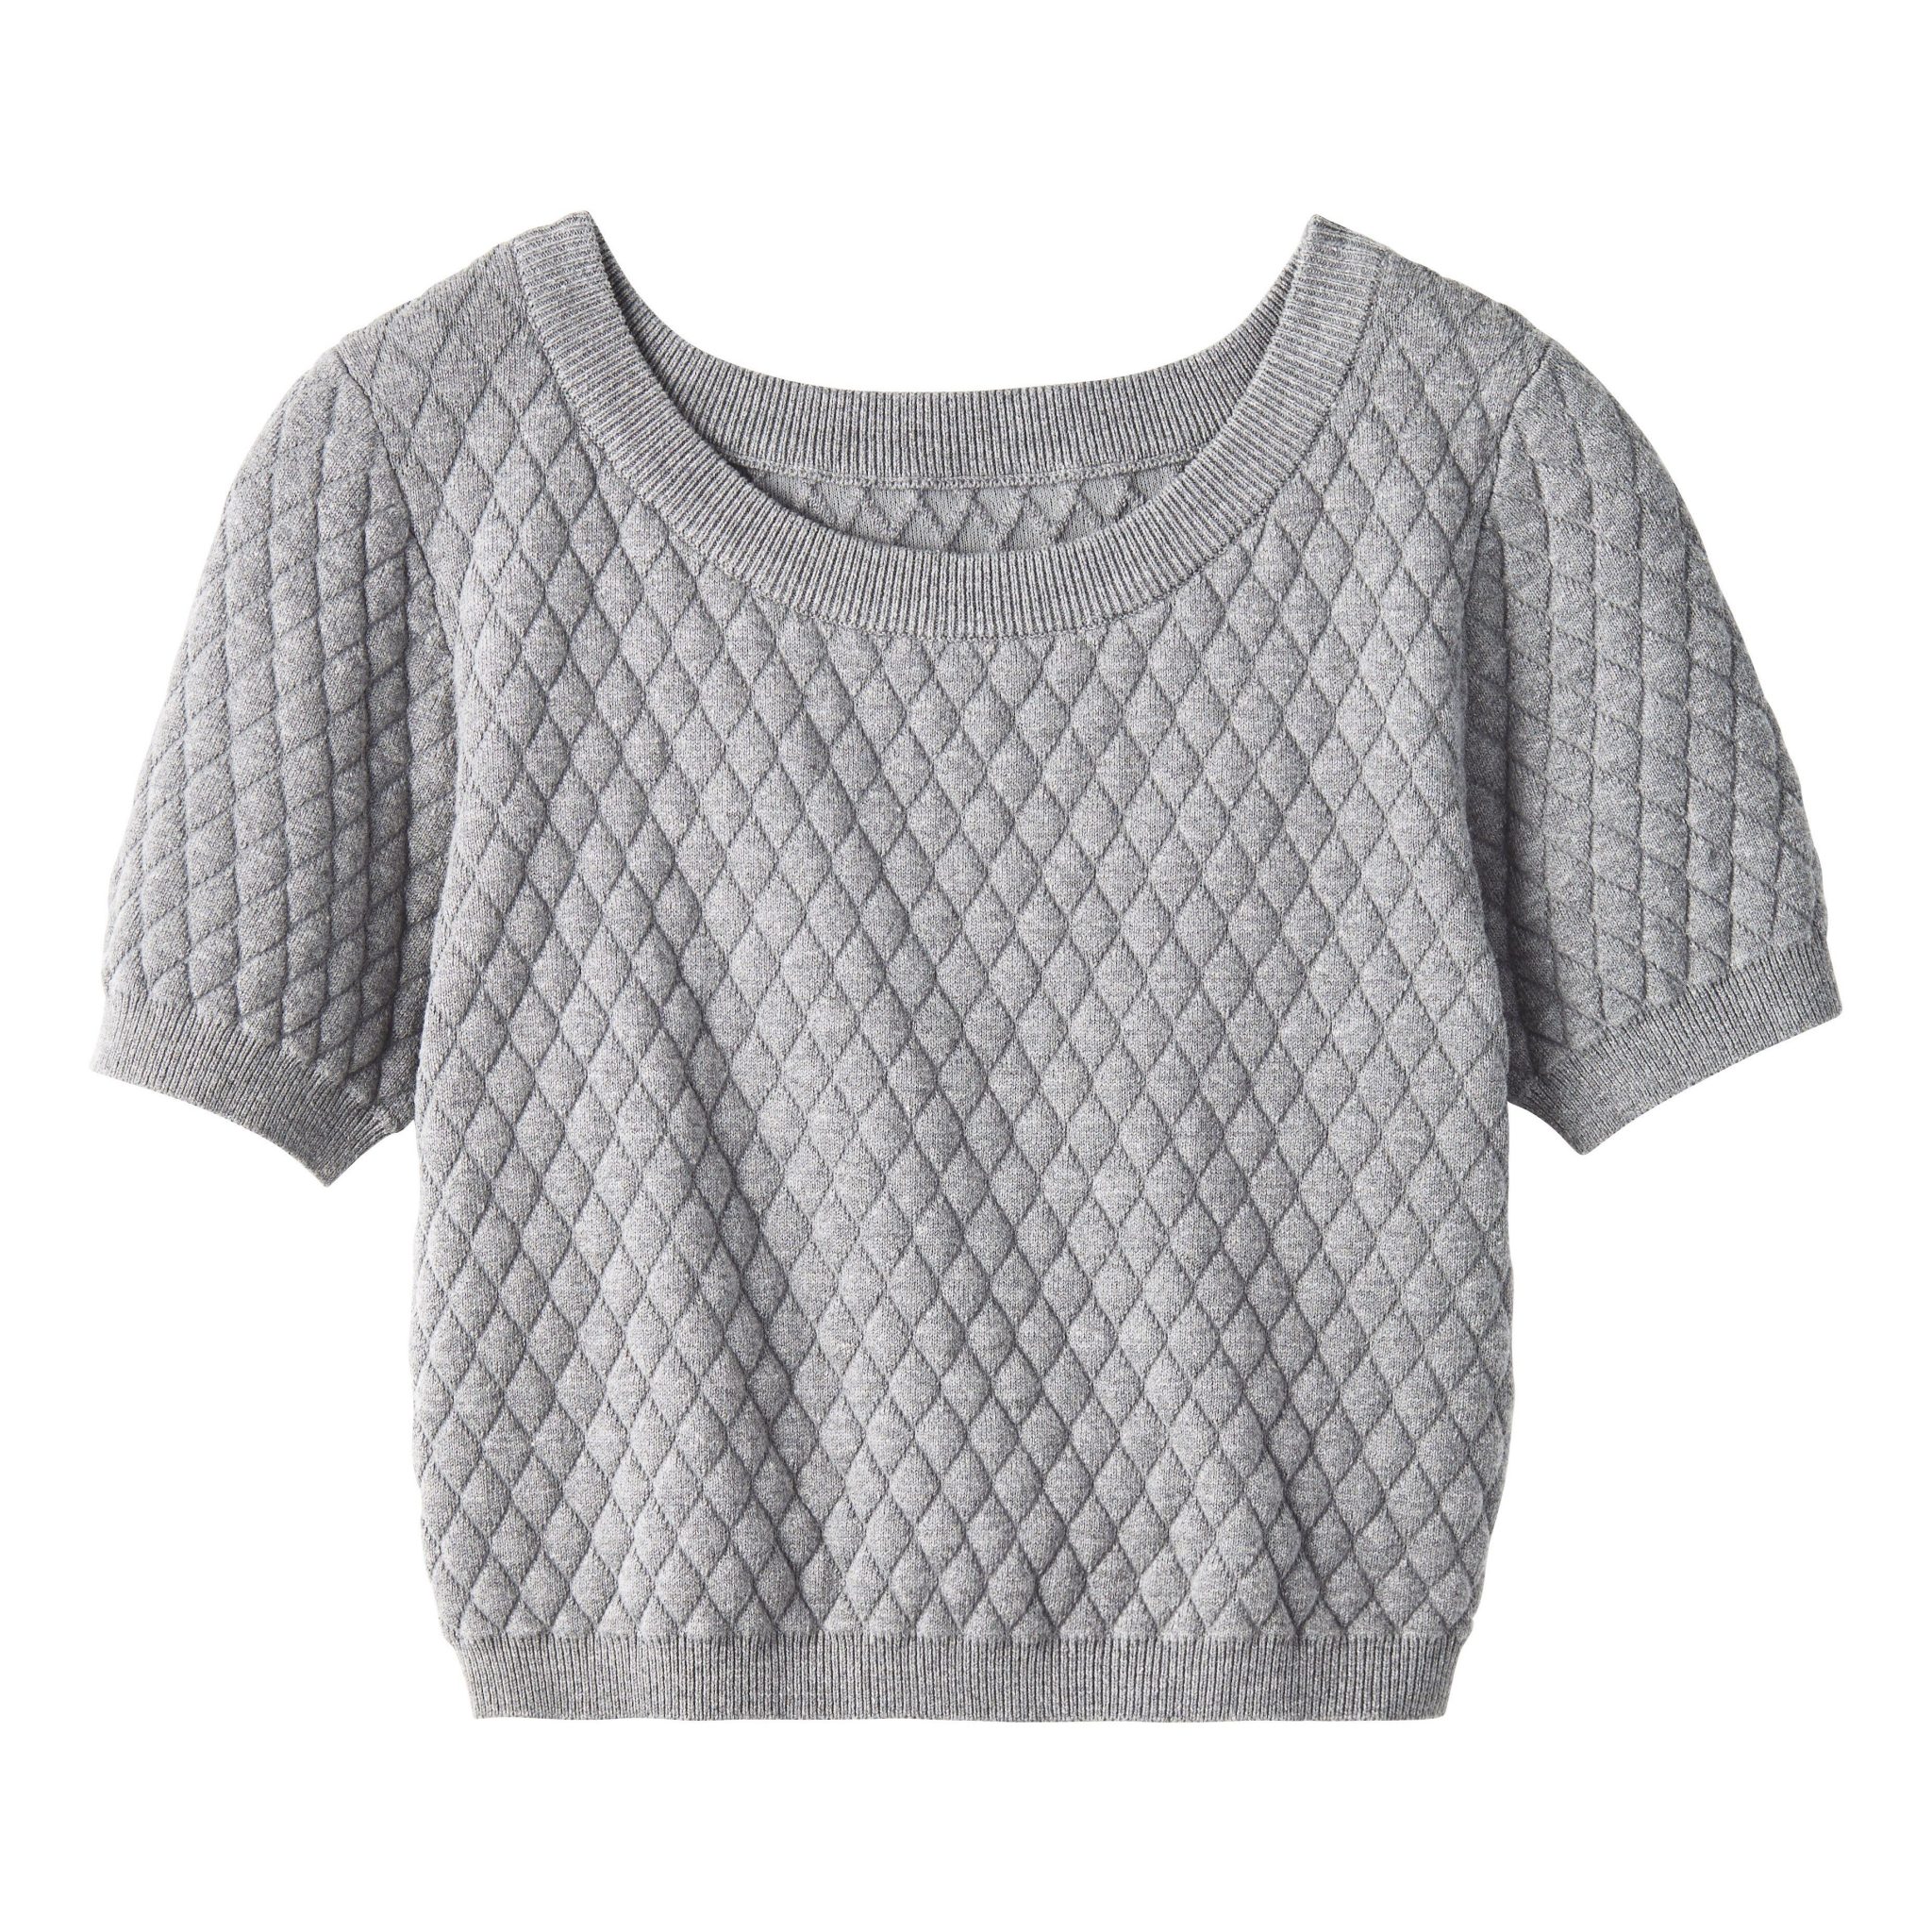 Quilted Crop Tee  $19.99  Compare at $35 